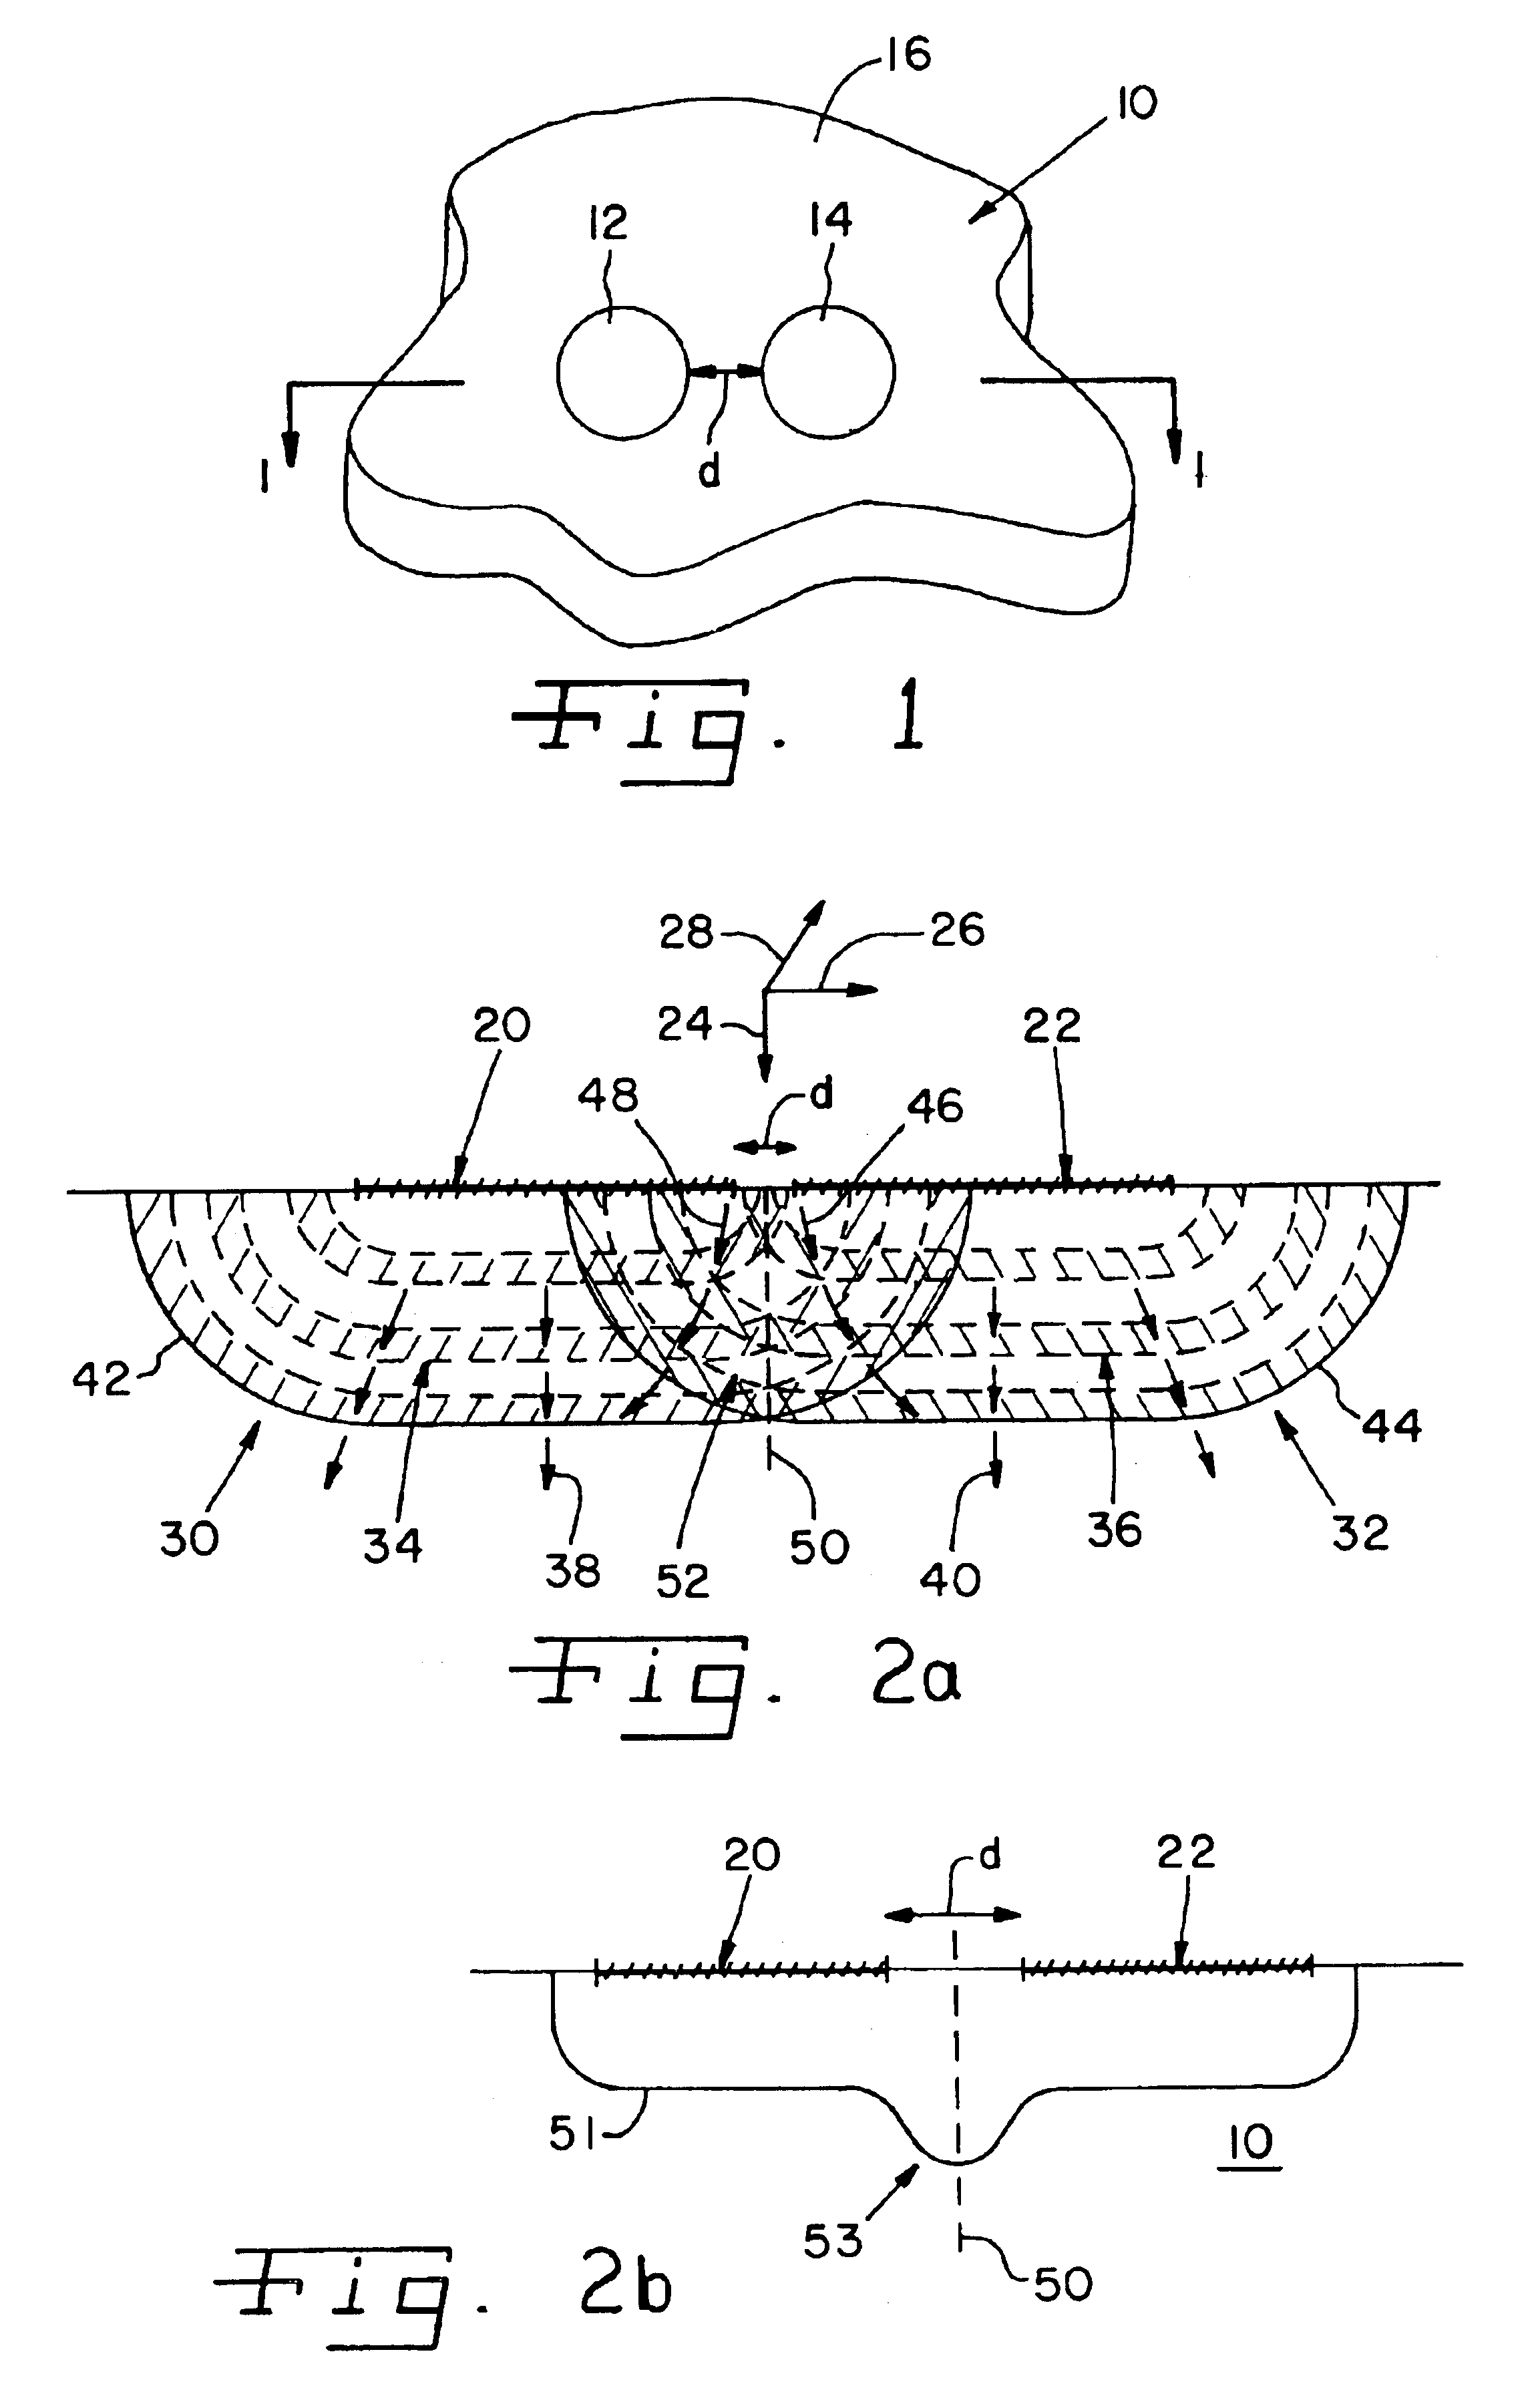 System for laser shock processing objects to produce enhanced stress distribution profiles